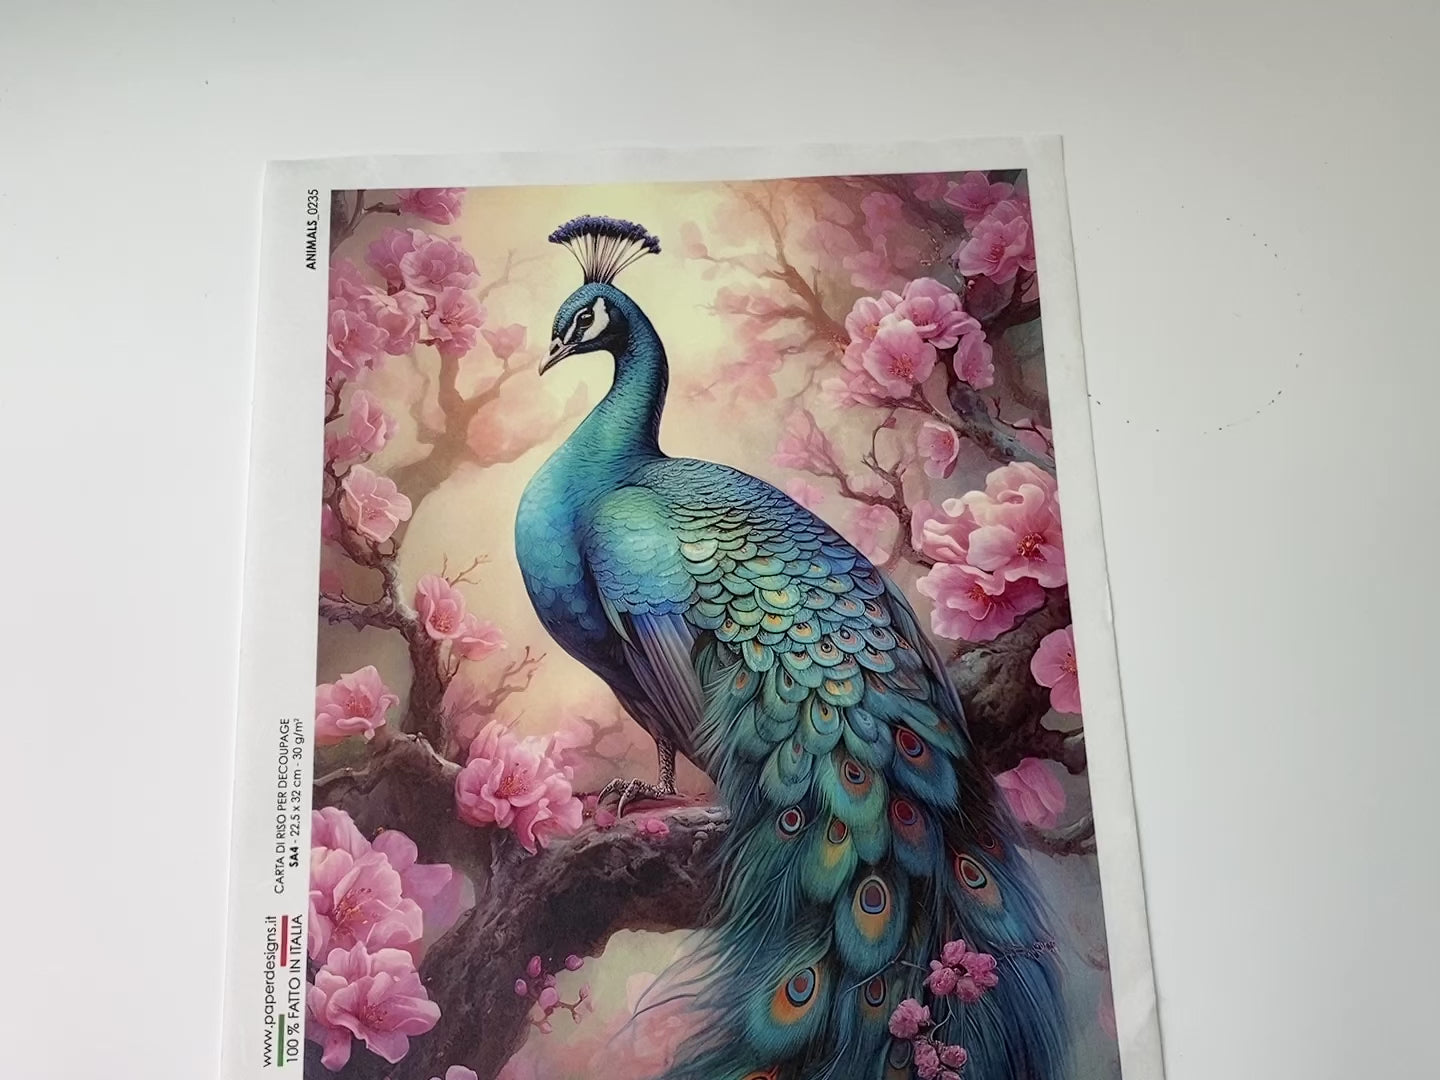 A 13 second video shows a close-up and hand lifting and folding over the top left corner to show the backside of Paper Designs Italy's Bright Floral Peacock decoupage paper against a white background.